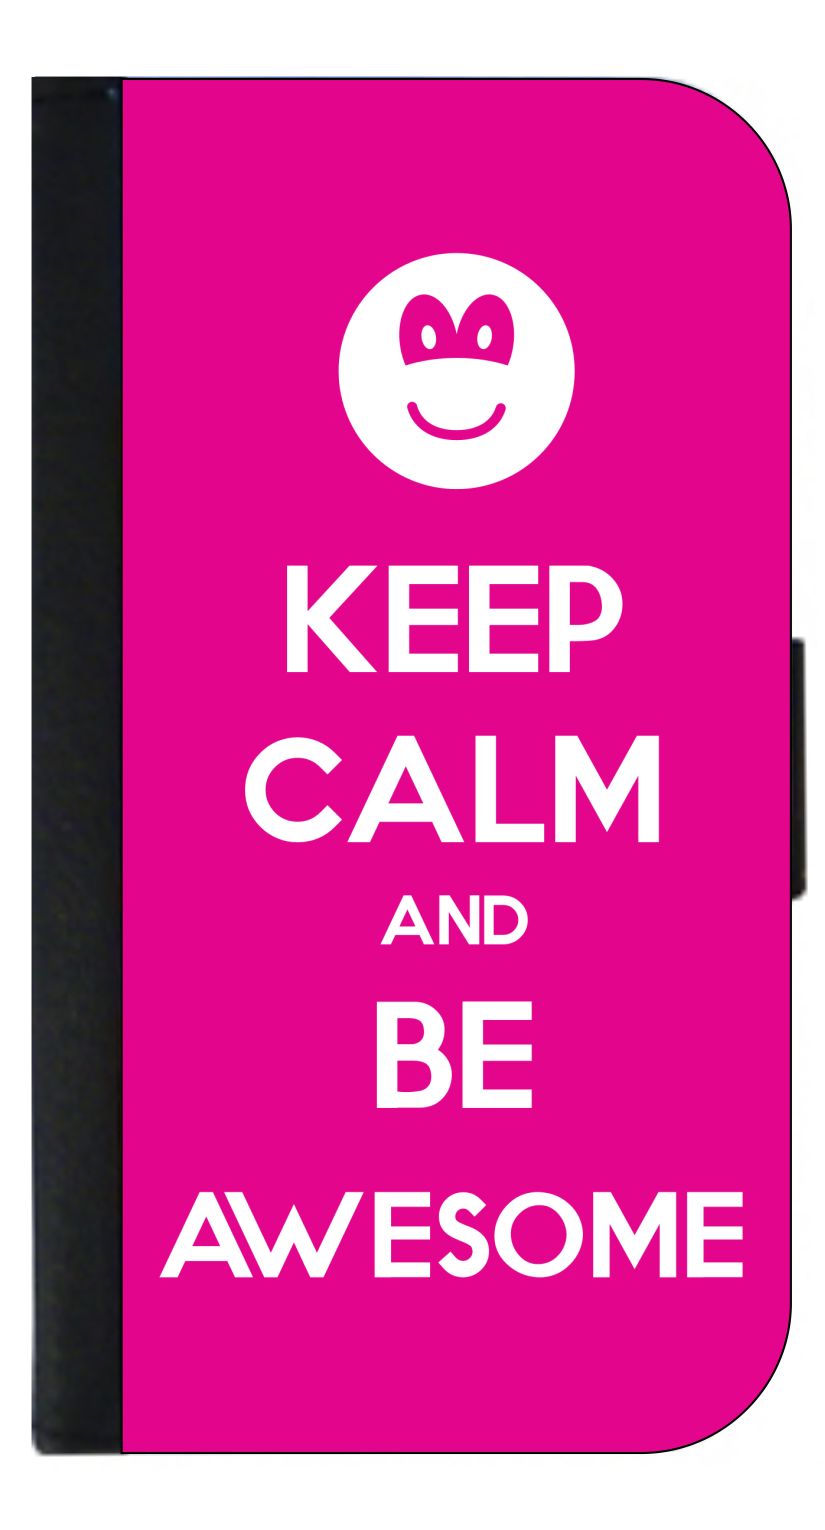 Keep Calm and Be Awesome - Galaxy s10p Case - Galaxy s10 Plus Case - Galaxy s10 Plus Wallet Case - s10 Plus Case Wallet - Galaxy s10 Plus Case Wallet - s10 Plus Case Flip Cover - image 1 of 3